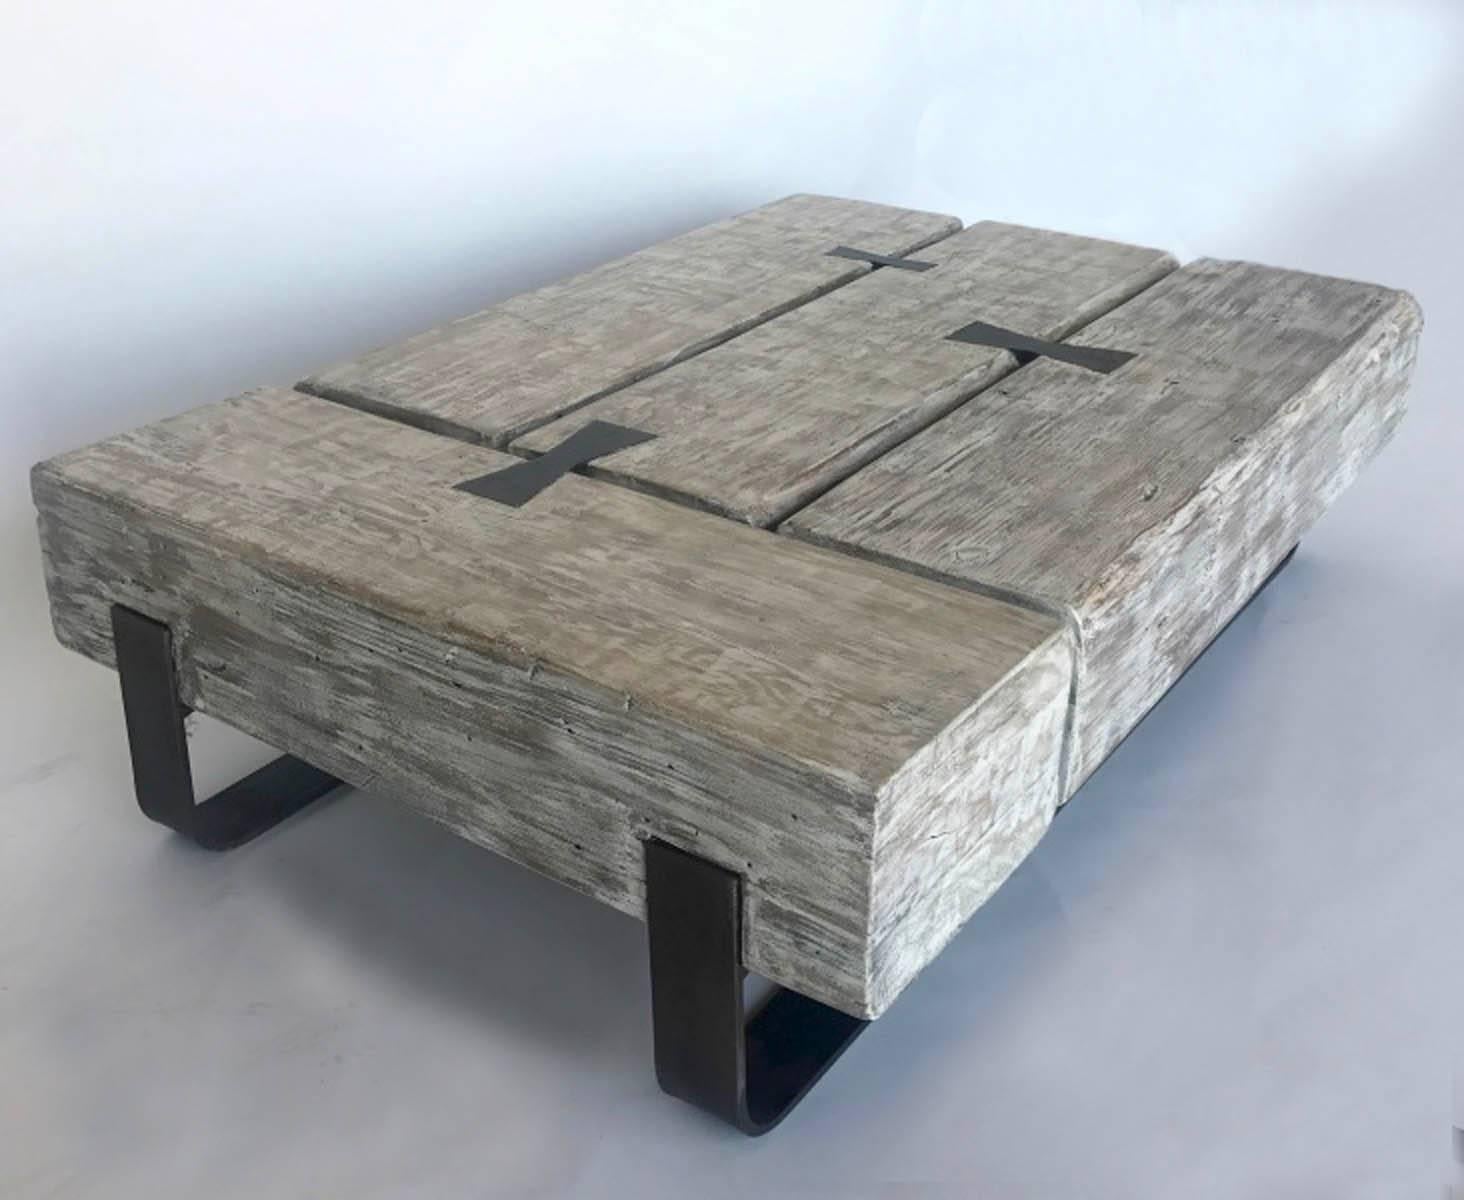 Reclaimed beam coffee table with iron mariposas (butterflies) and hand-forged iron base.
Grey/white finish.
Made in Los Angeles by Dos Gallos Studio.
 